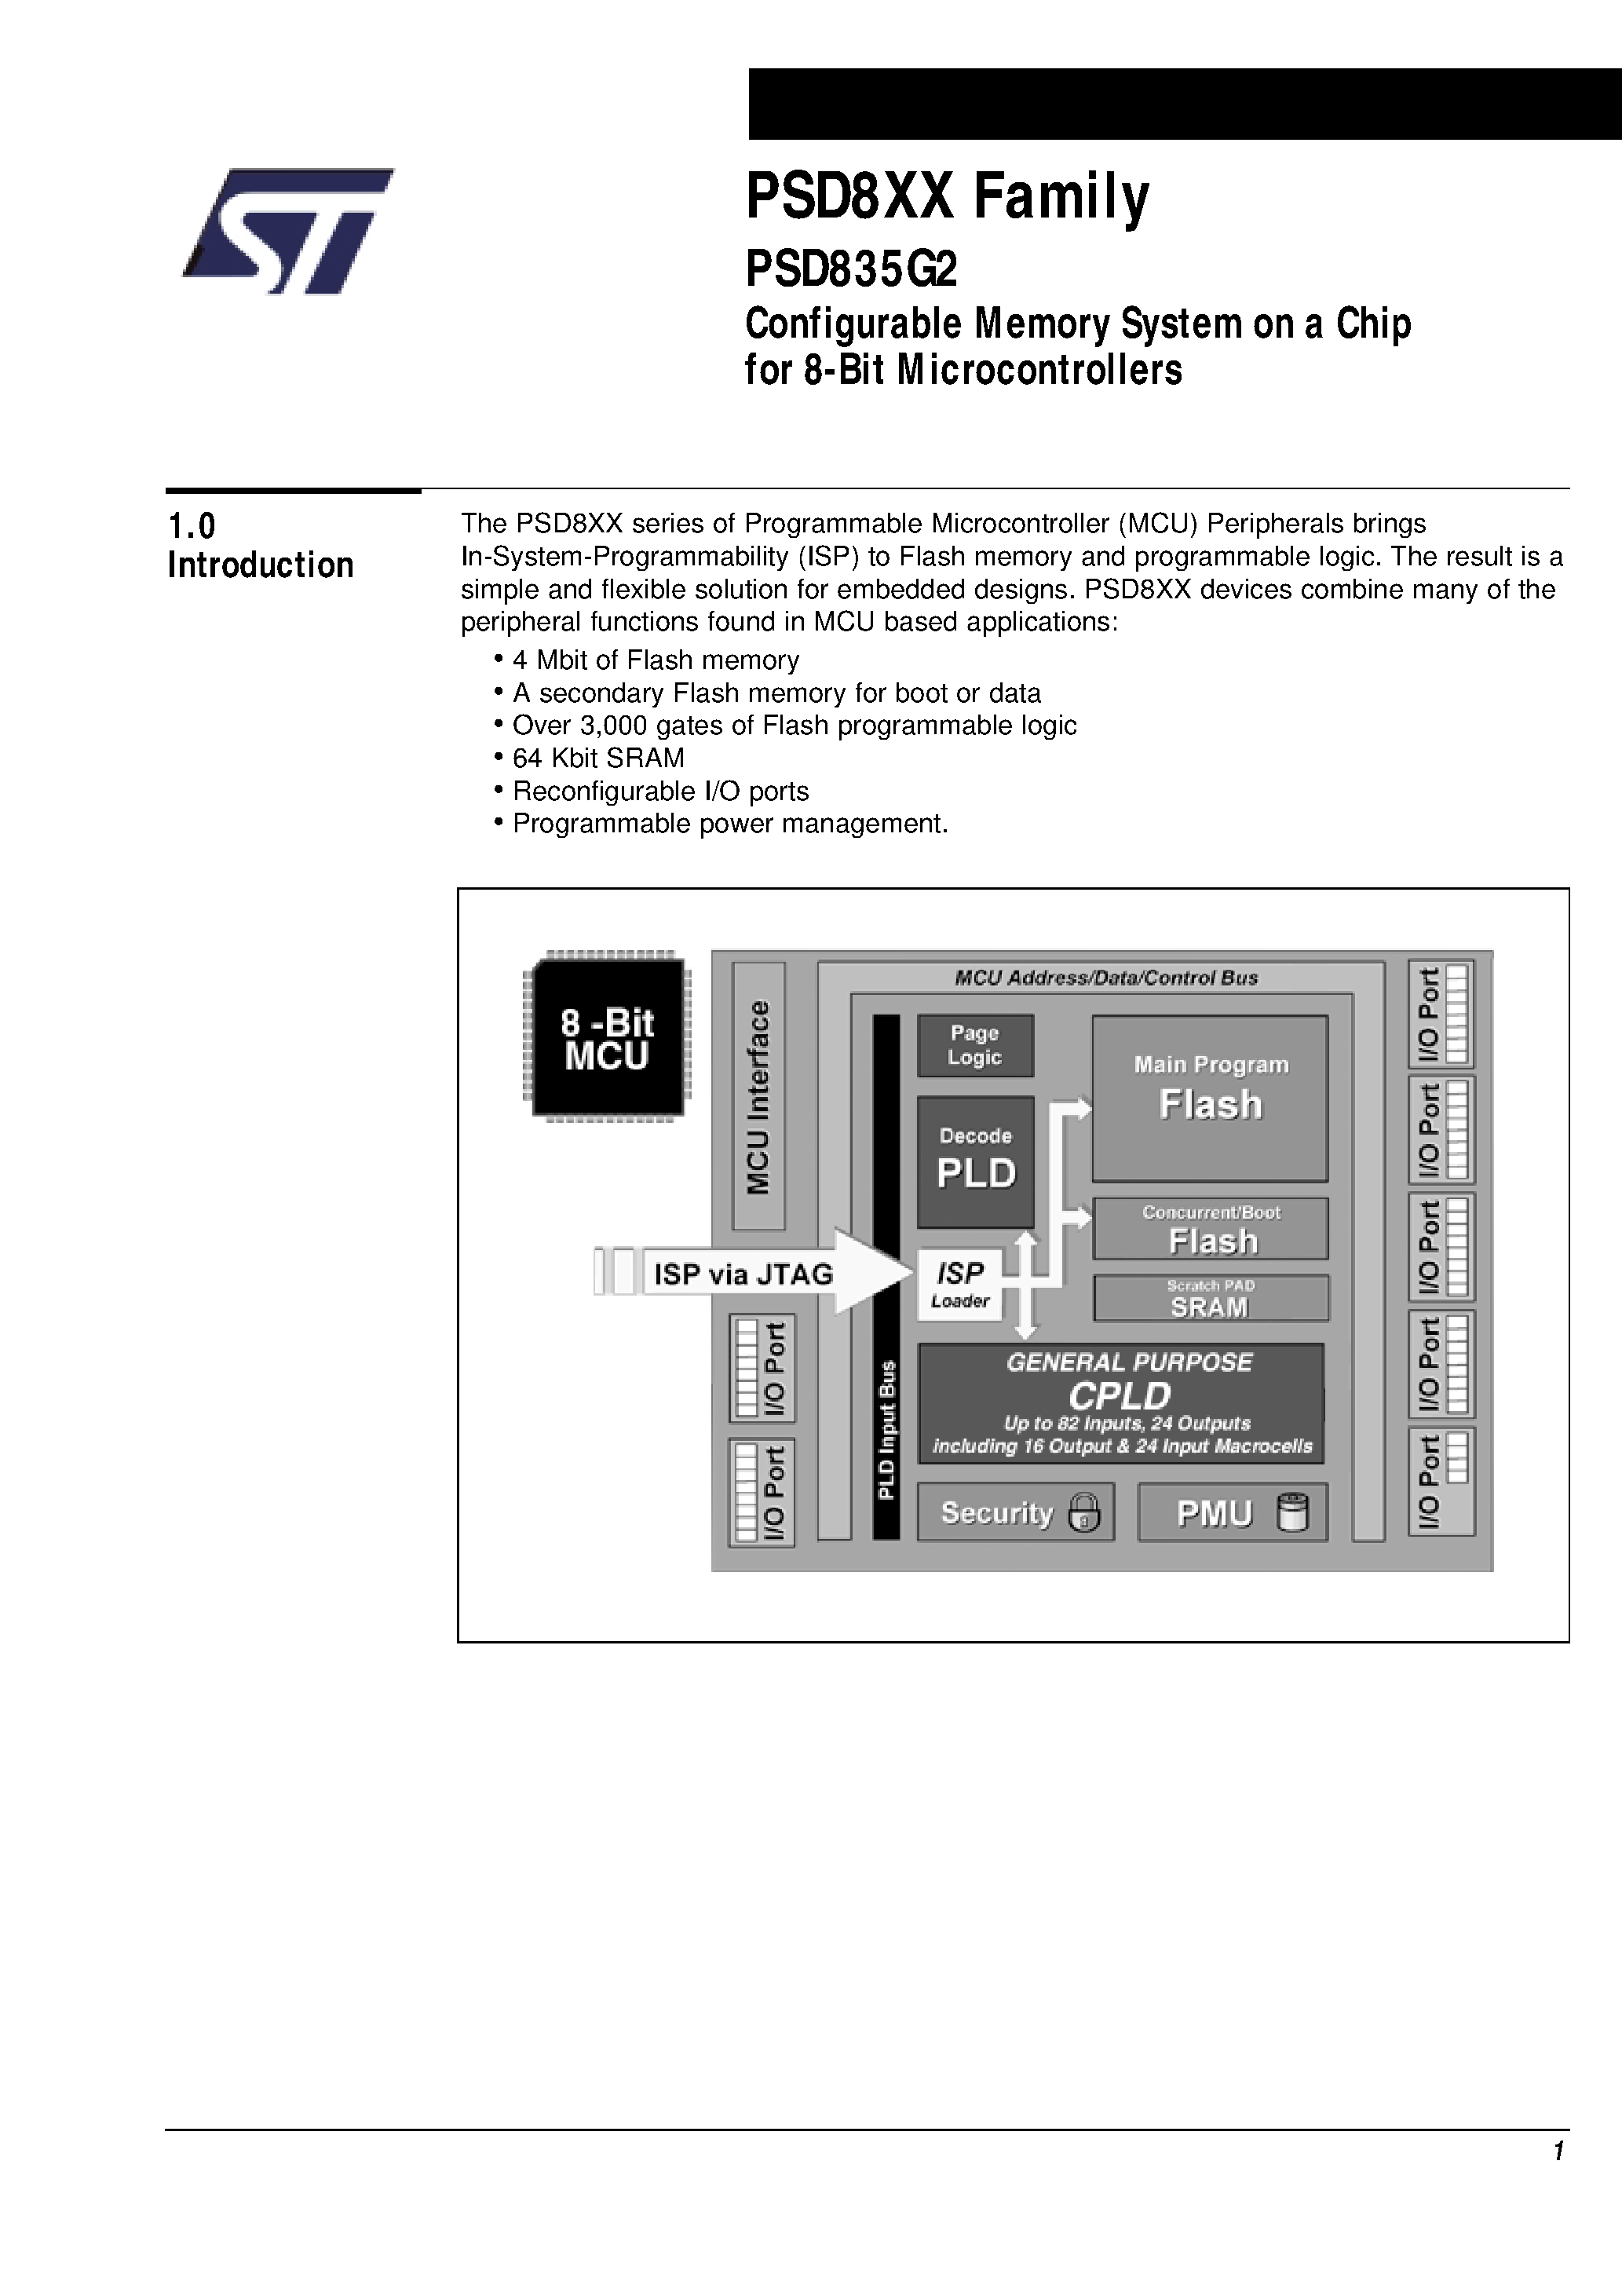 Datasheet PSD835F1-A-20JI - Configurable Memory System on a Chip for 8-Bit Microcontrollers page 2